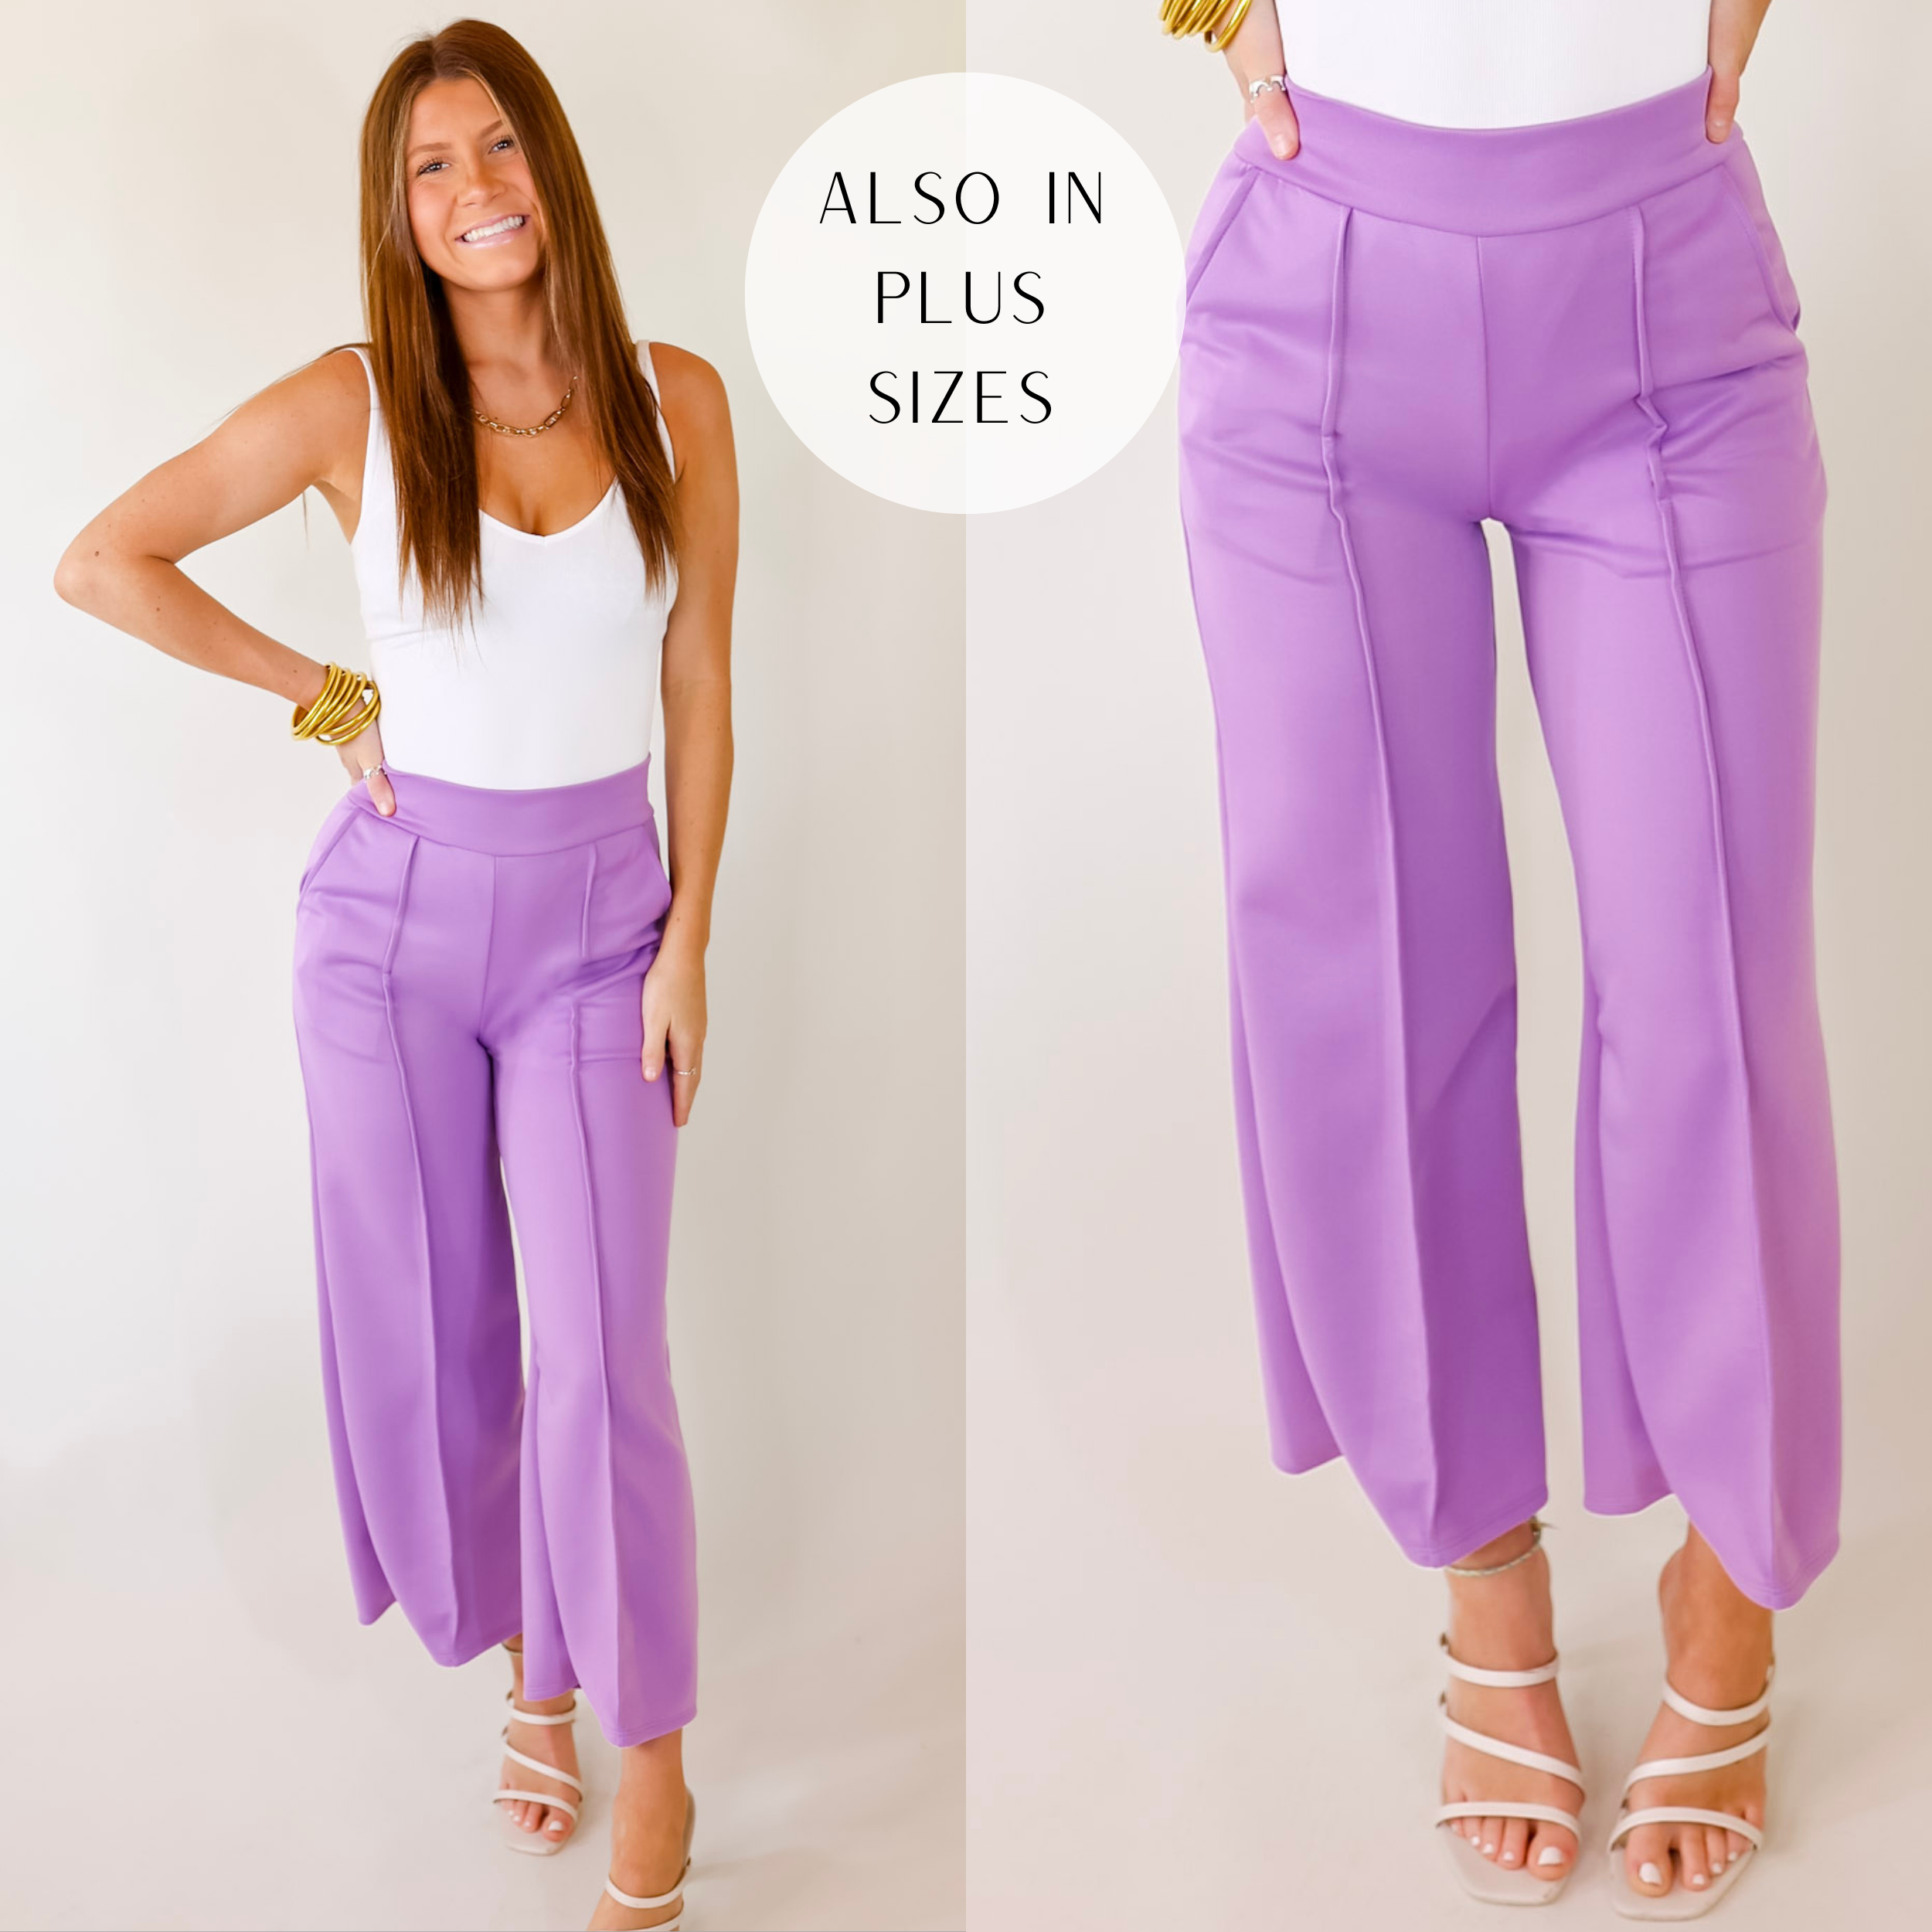 A pair of lavender mid rise pants with a front pleat on both legs, pockets, and a straight leg style